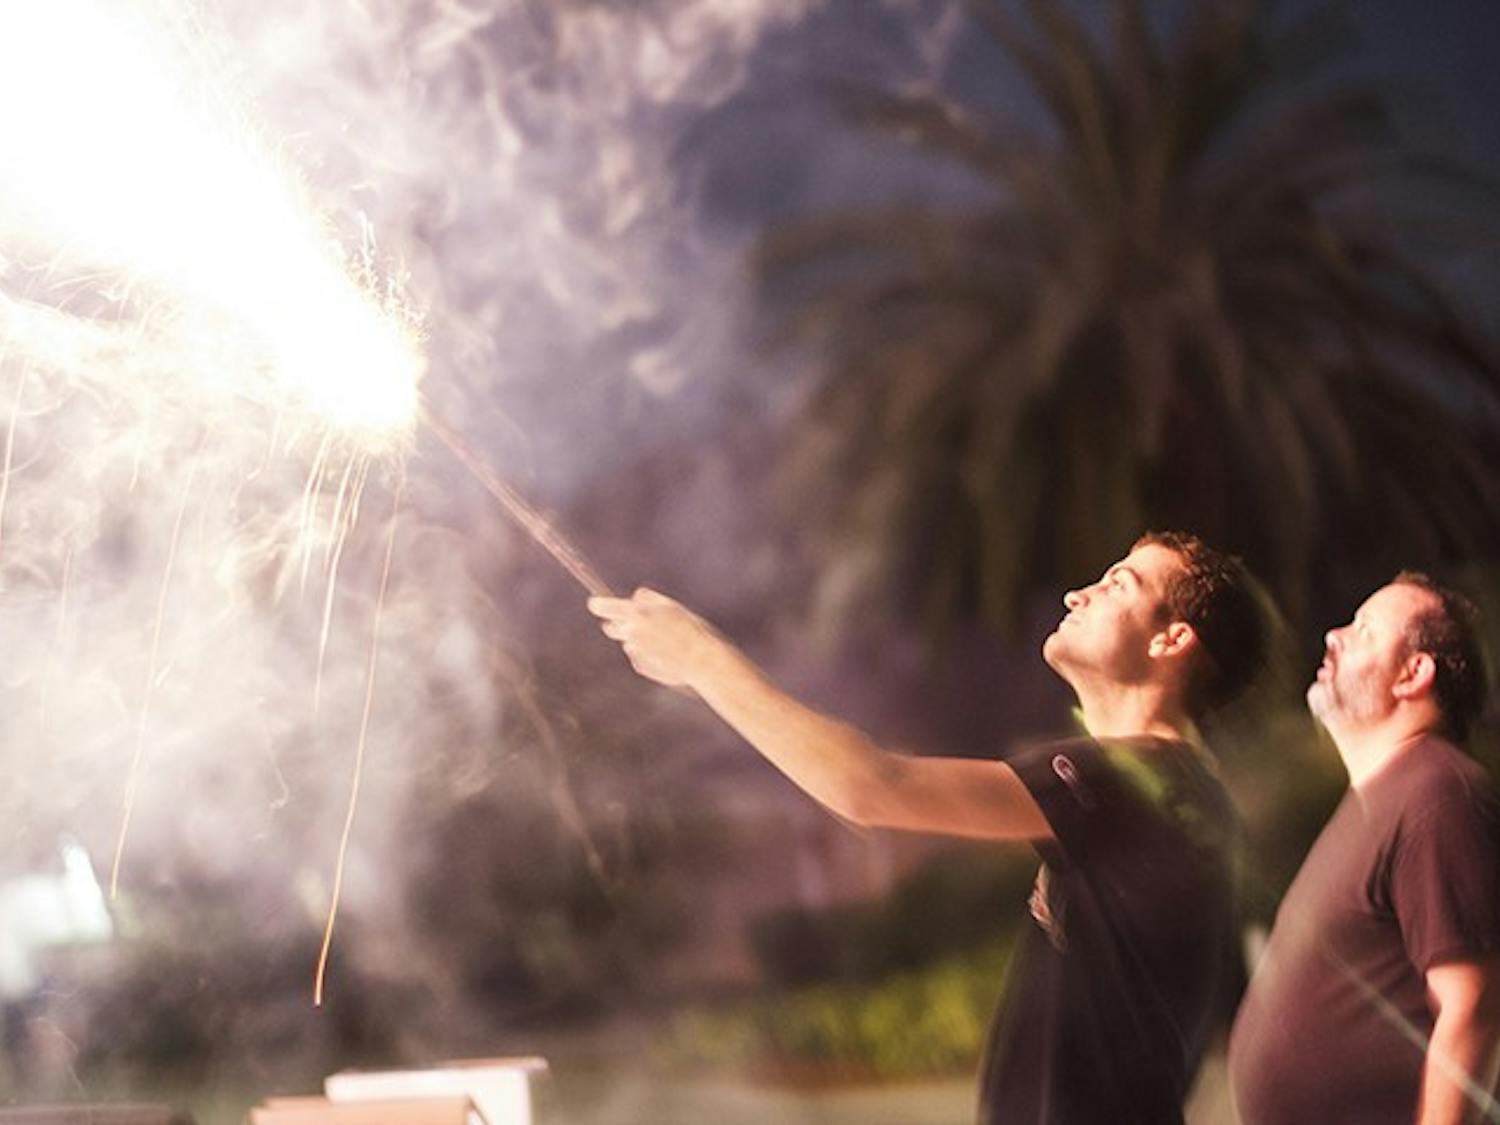 Shooting off roman candles, a type of firework, on New Year's Eve